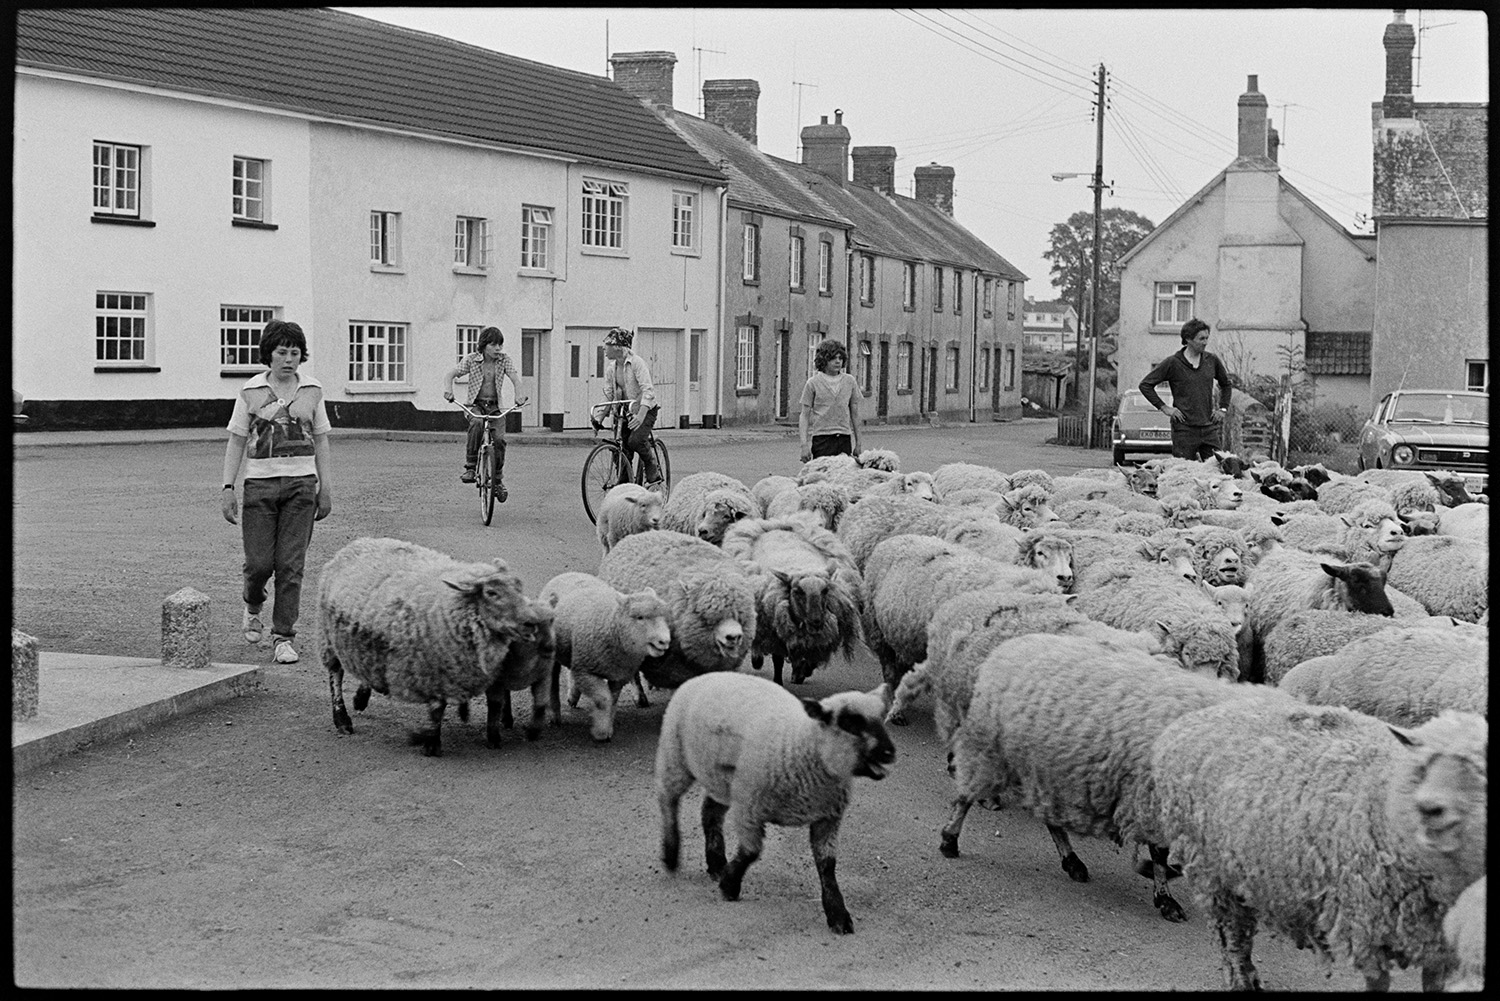 Farmers taking flock of sheep through village to be weighed and sorted. 
[Four teenagers, two on bicycles, helping a man, possibly Mr Cole, herd a flock of sheep through Ashreigney to be weighed and sorted. A row of terraced houses can be seen in the background.]